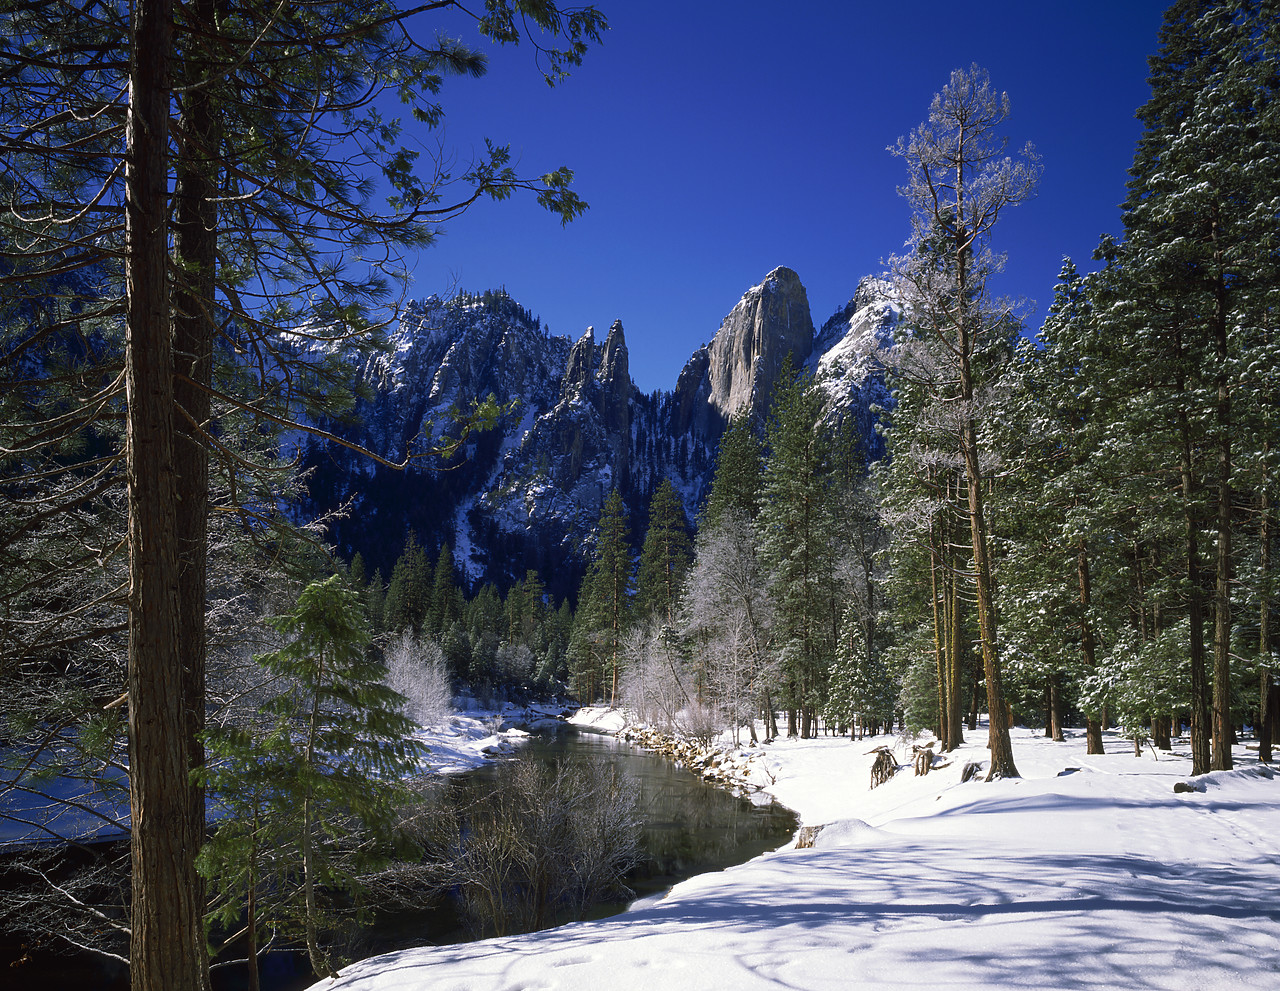 #891868 - Merced River & Cathedral Spire in Winter, Yosemite National Park, California, USA